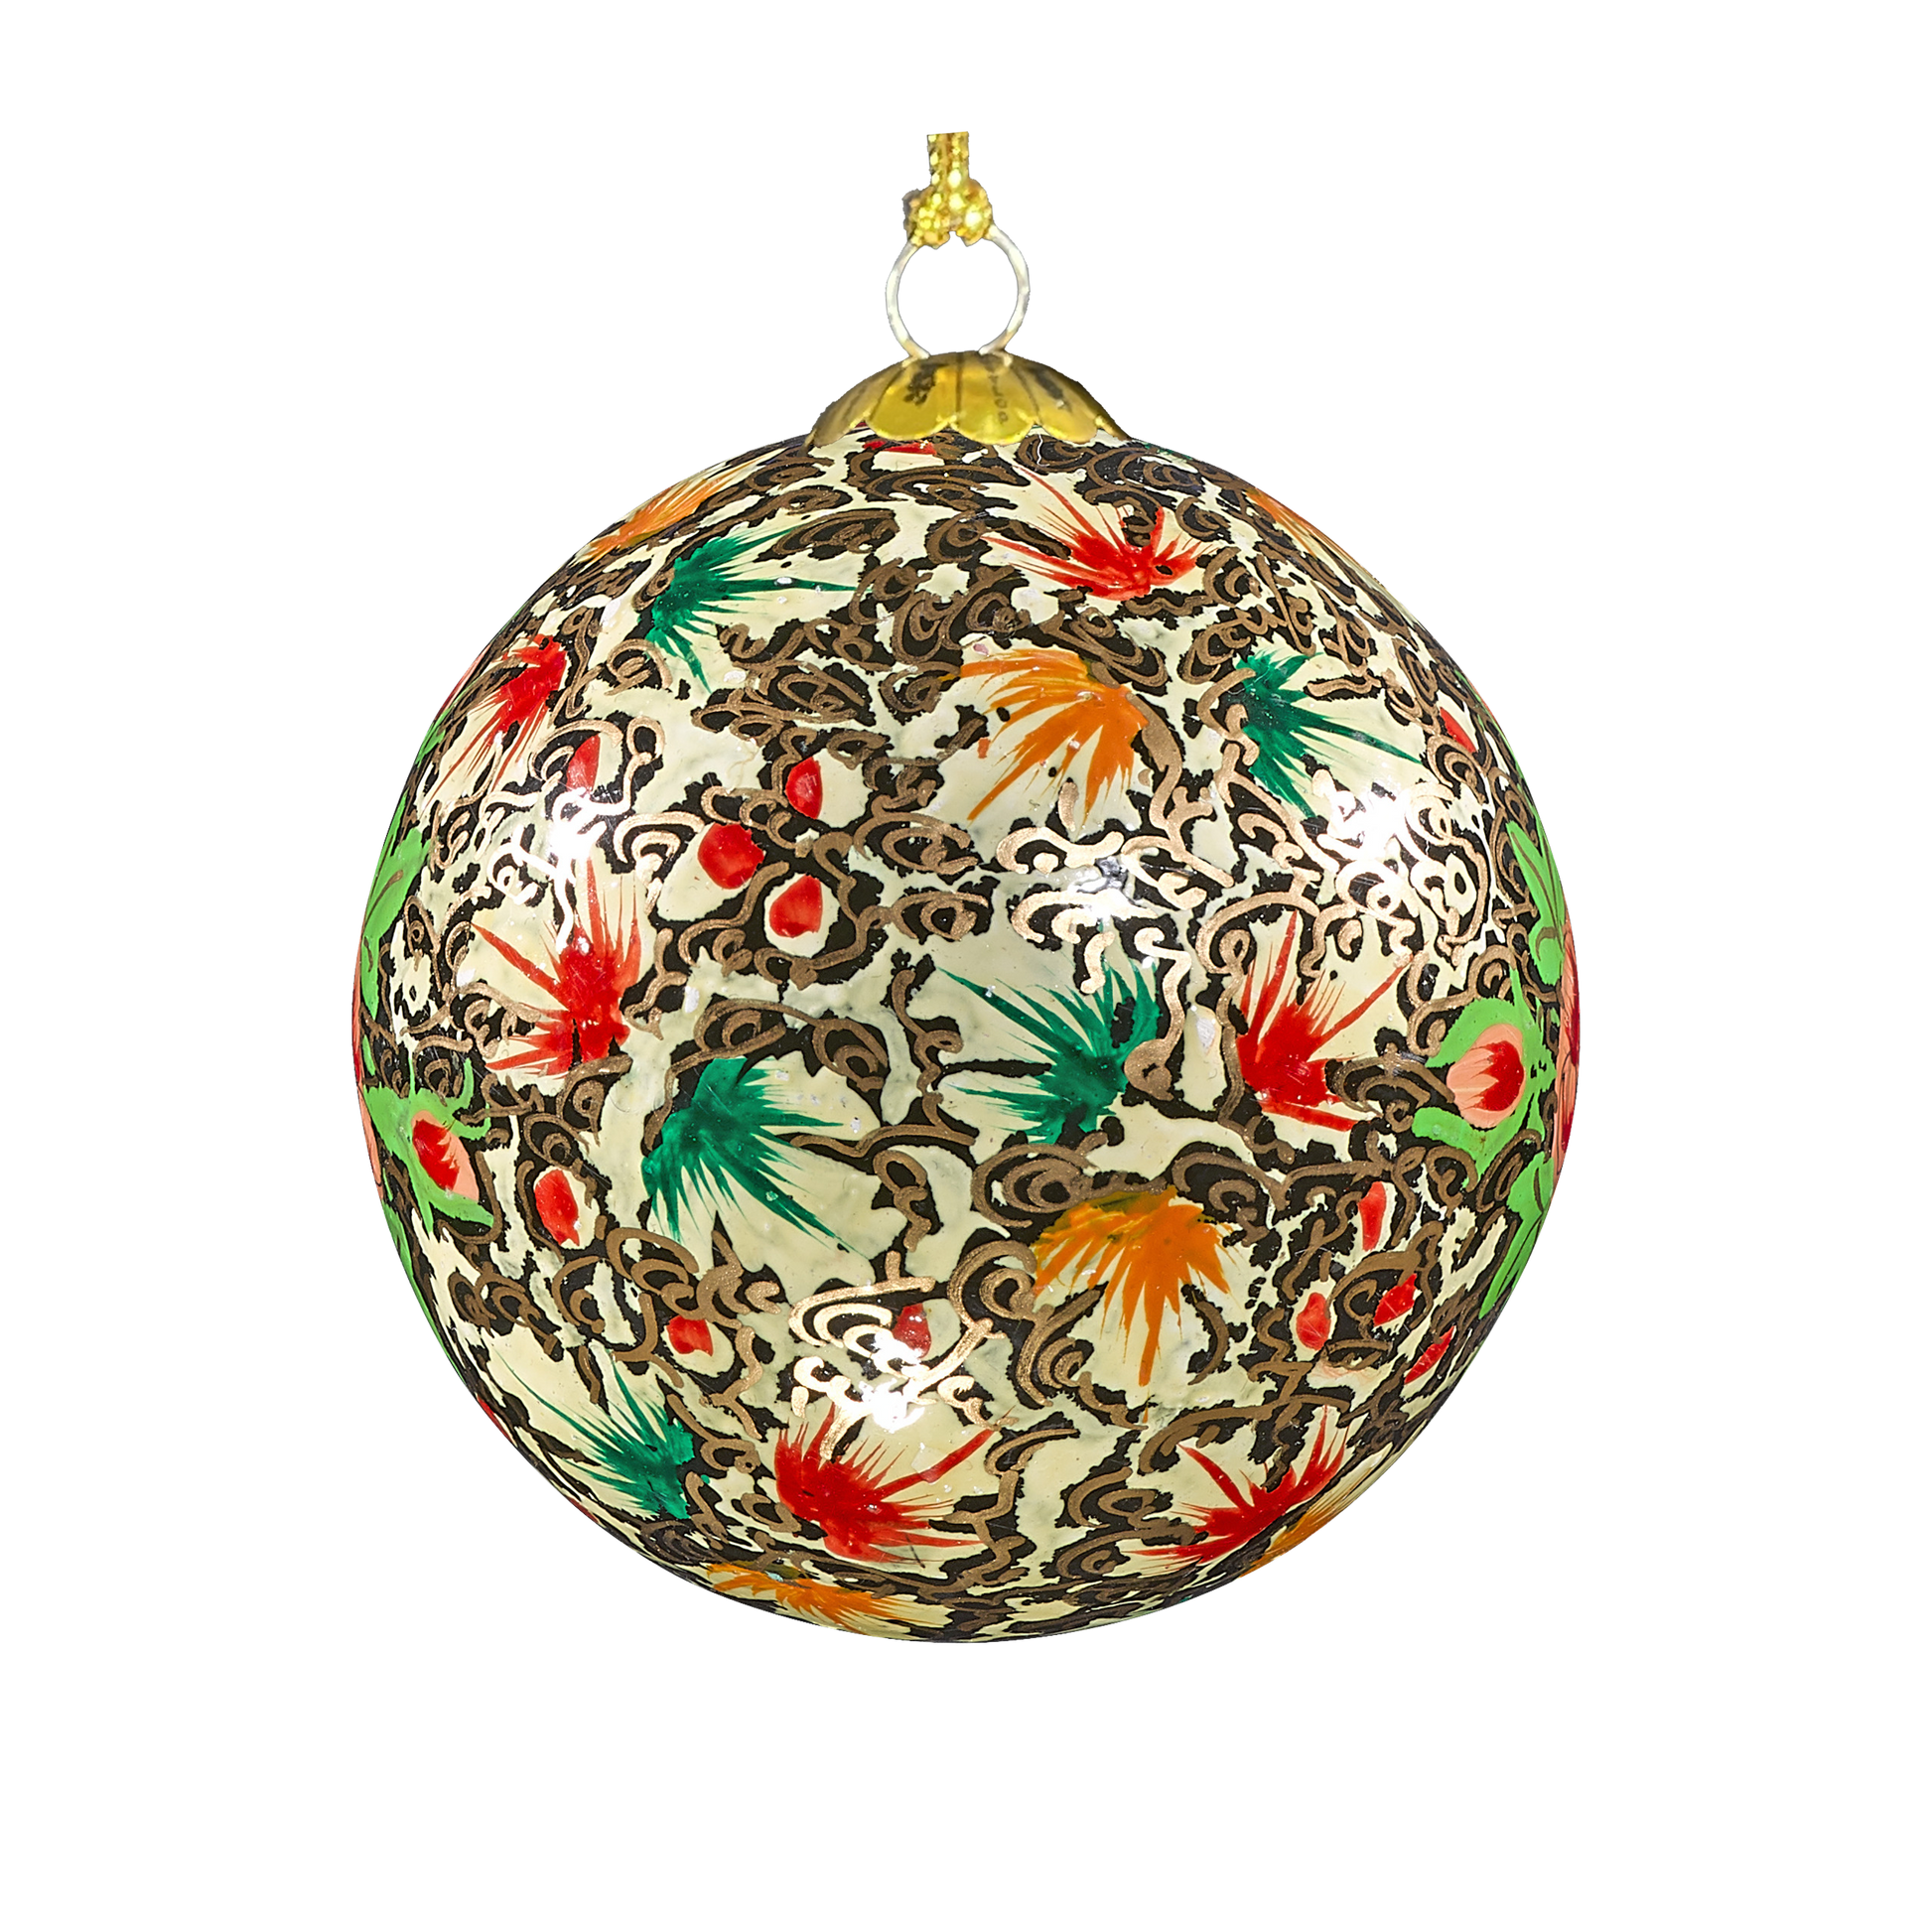 Colorful Christmas Bauble for Christmas tree decorations